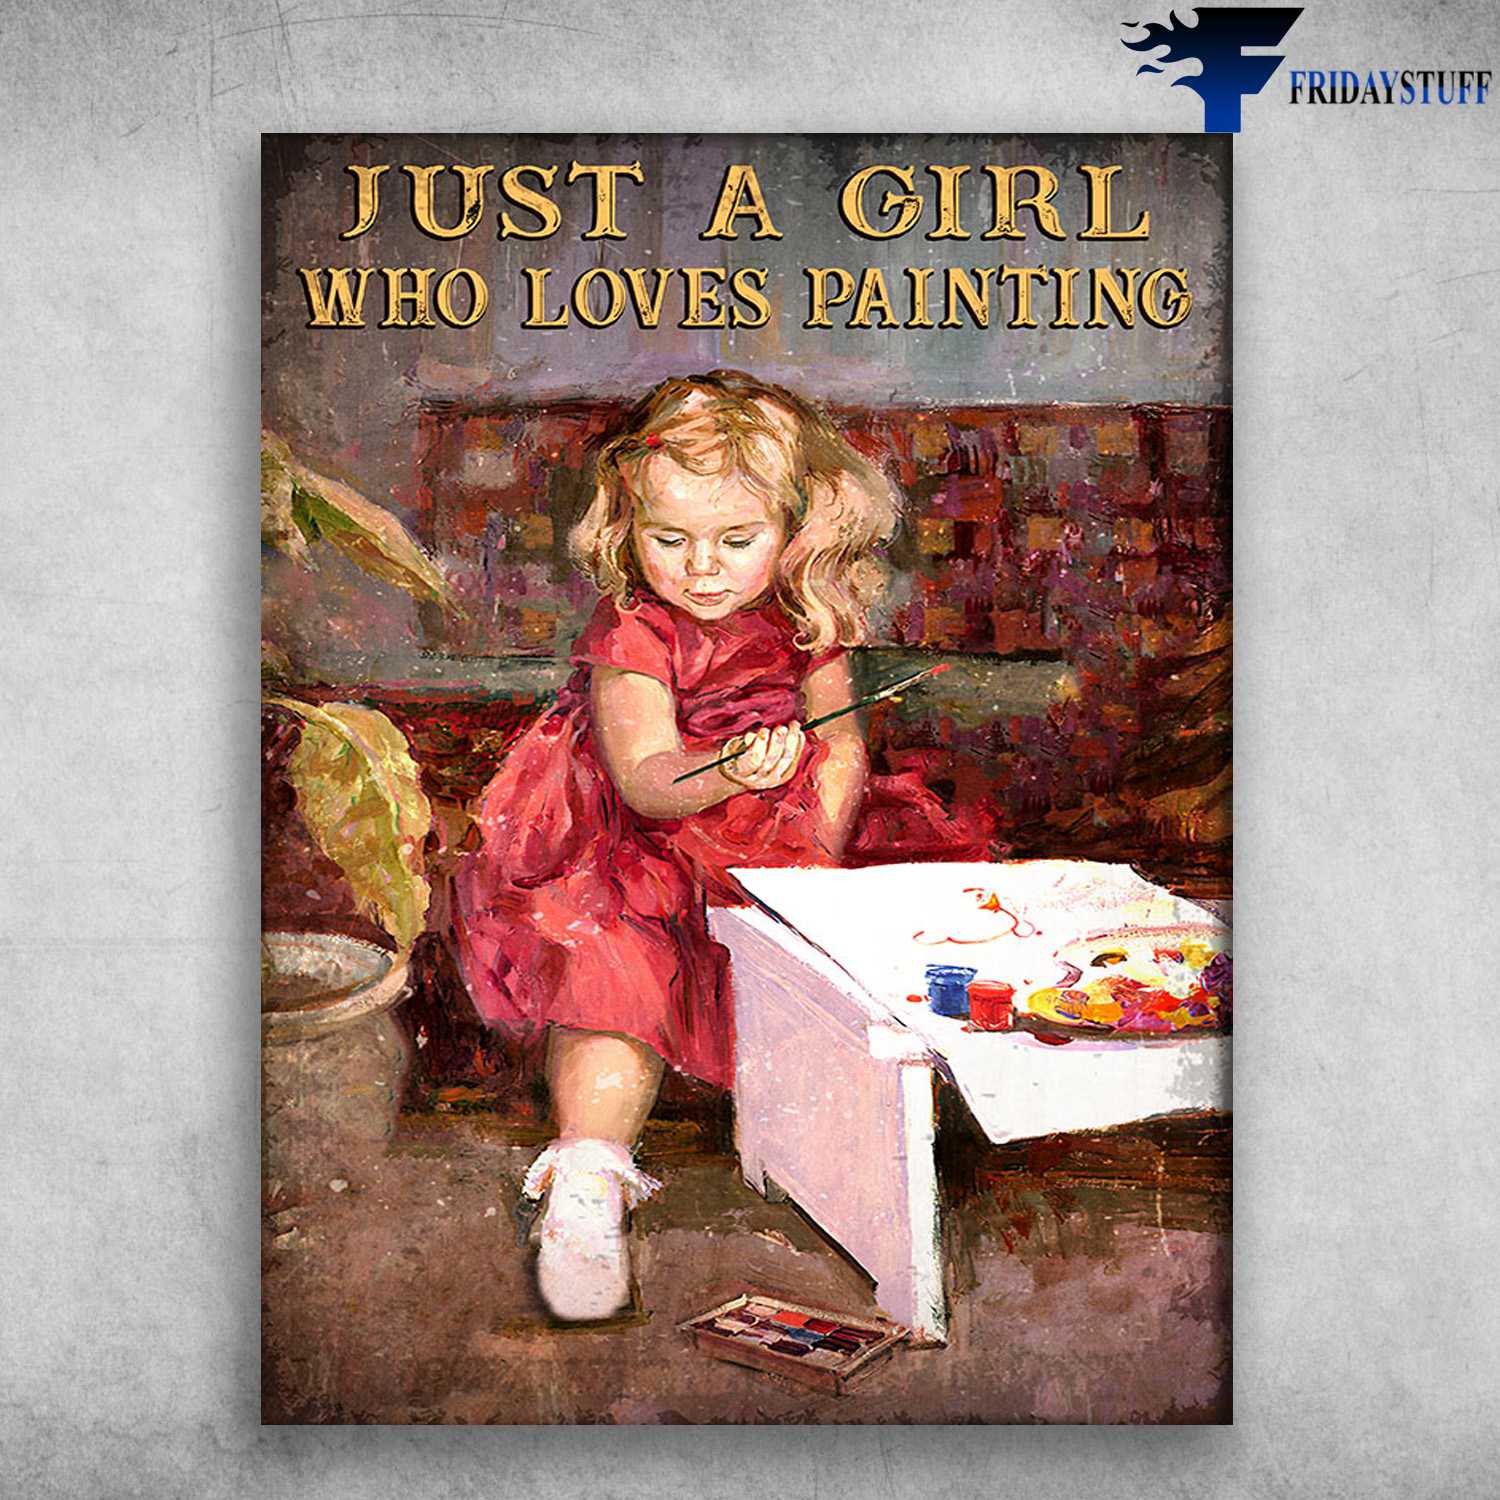 Drawing Girl, Painting Lover - Just A Girl, Who Loves Painting